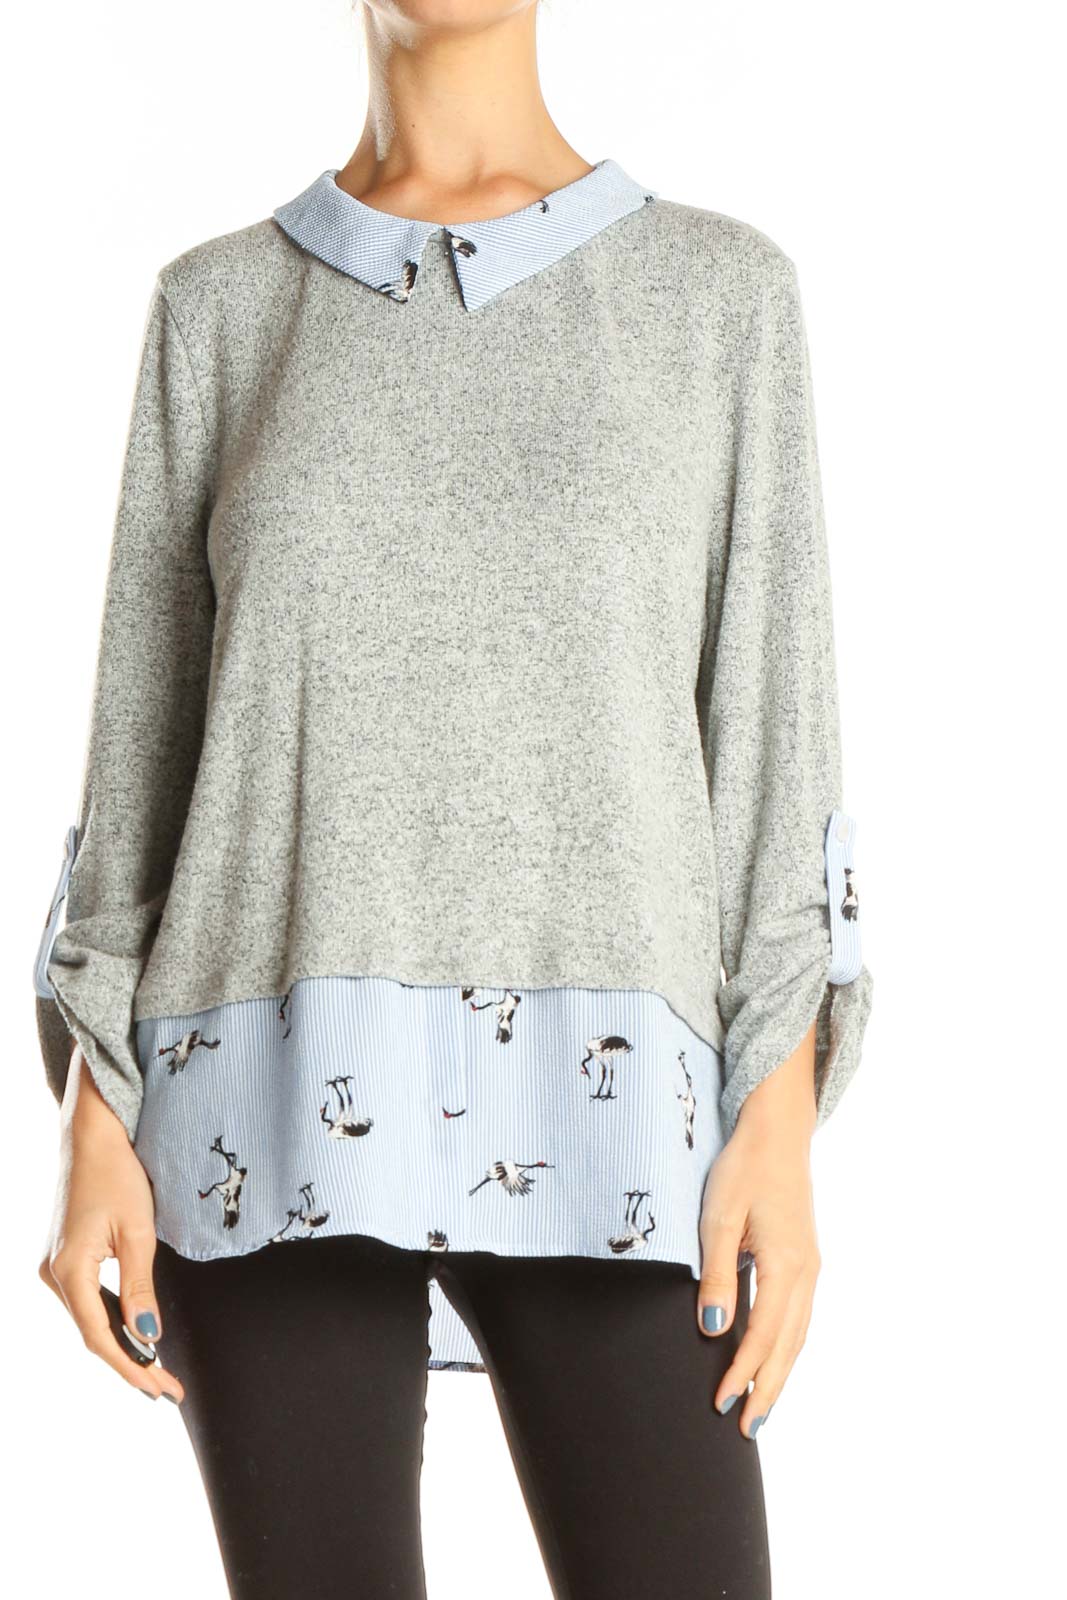 Gray Blue Layered Printed All Day Wear Top Front